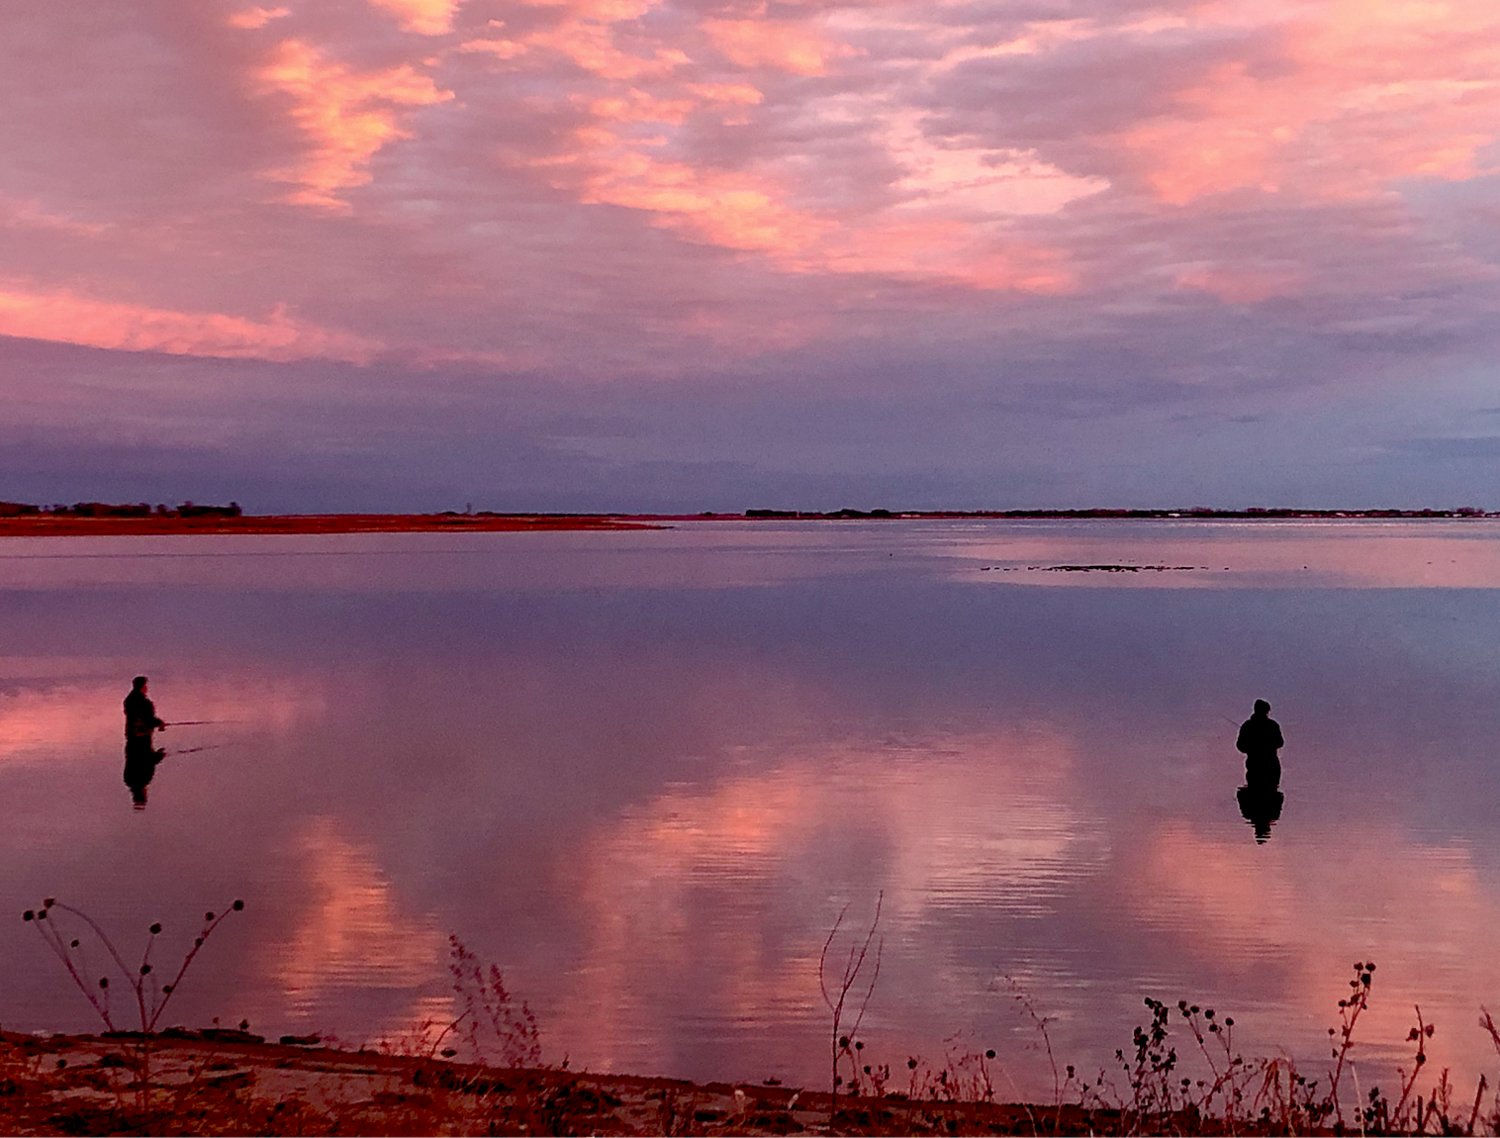 Calm waters reflect the beautiful South Dakota sunset as Gerald and Gordie Skyberg enjoy one last day of wader fishing, while listening to the geese and ducks in the background.